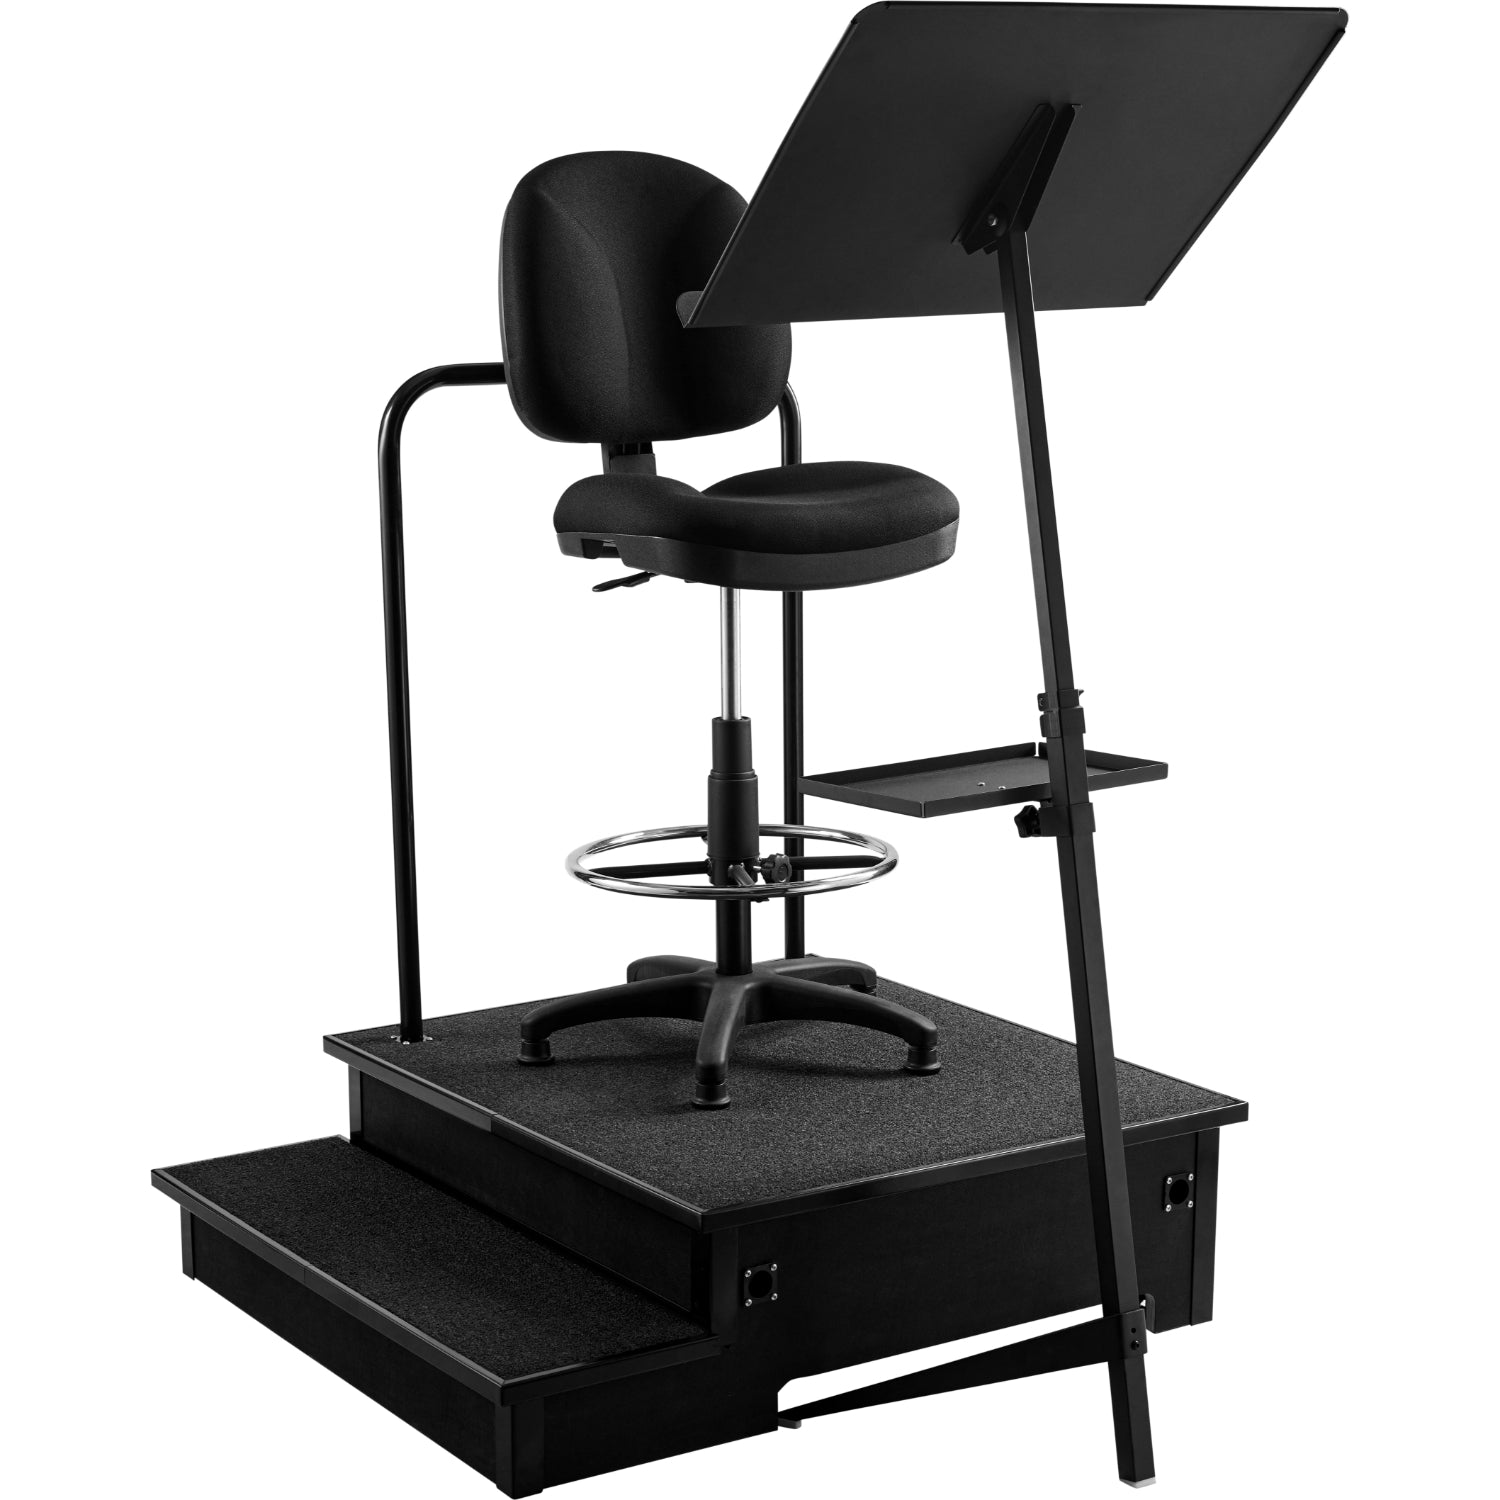 Classic Conductor's Set (Includes Pneumatic Conductor's Chair, Stand and Podium)